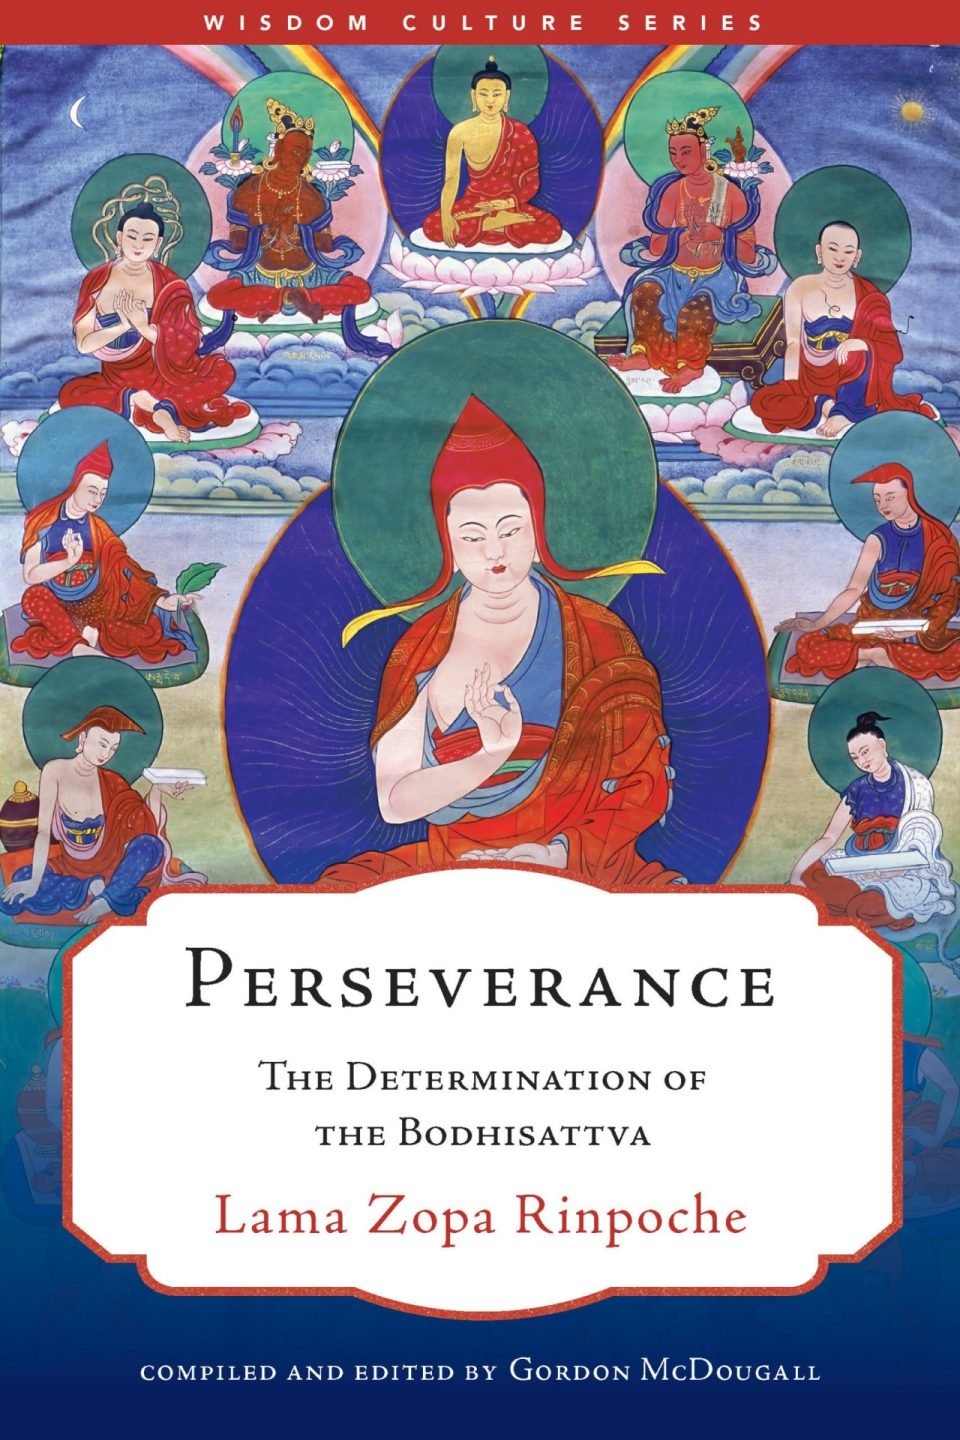 New Book from Lama Zopa Rinpoche: Perseverance, The Determination of the Bodhisattva